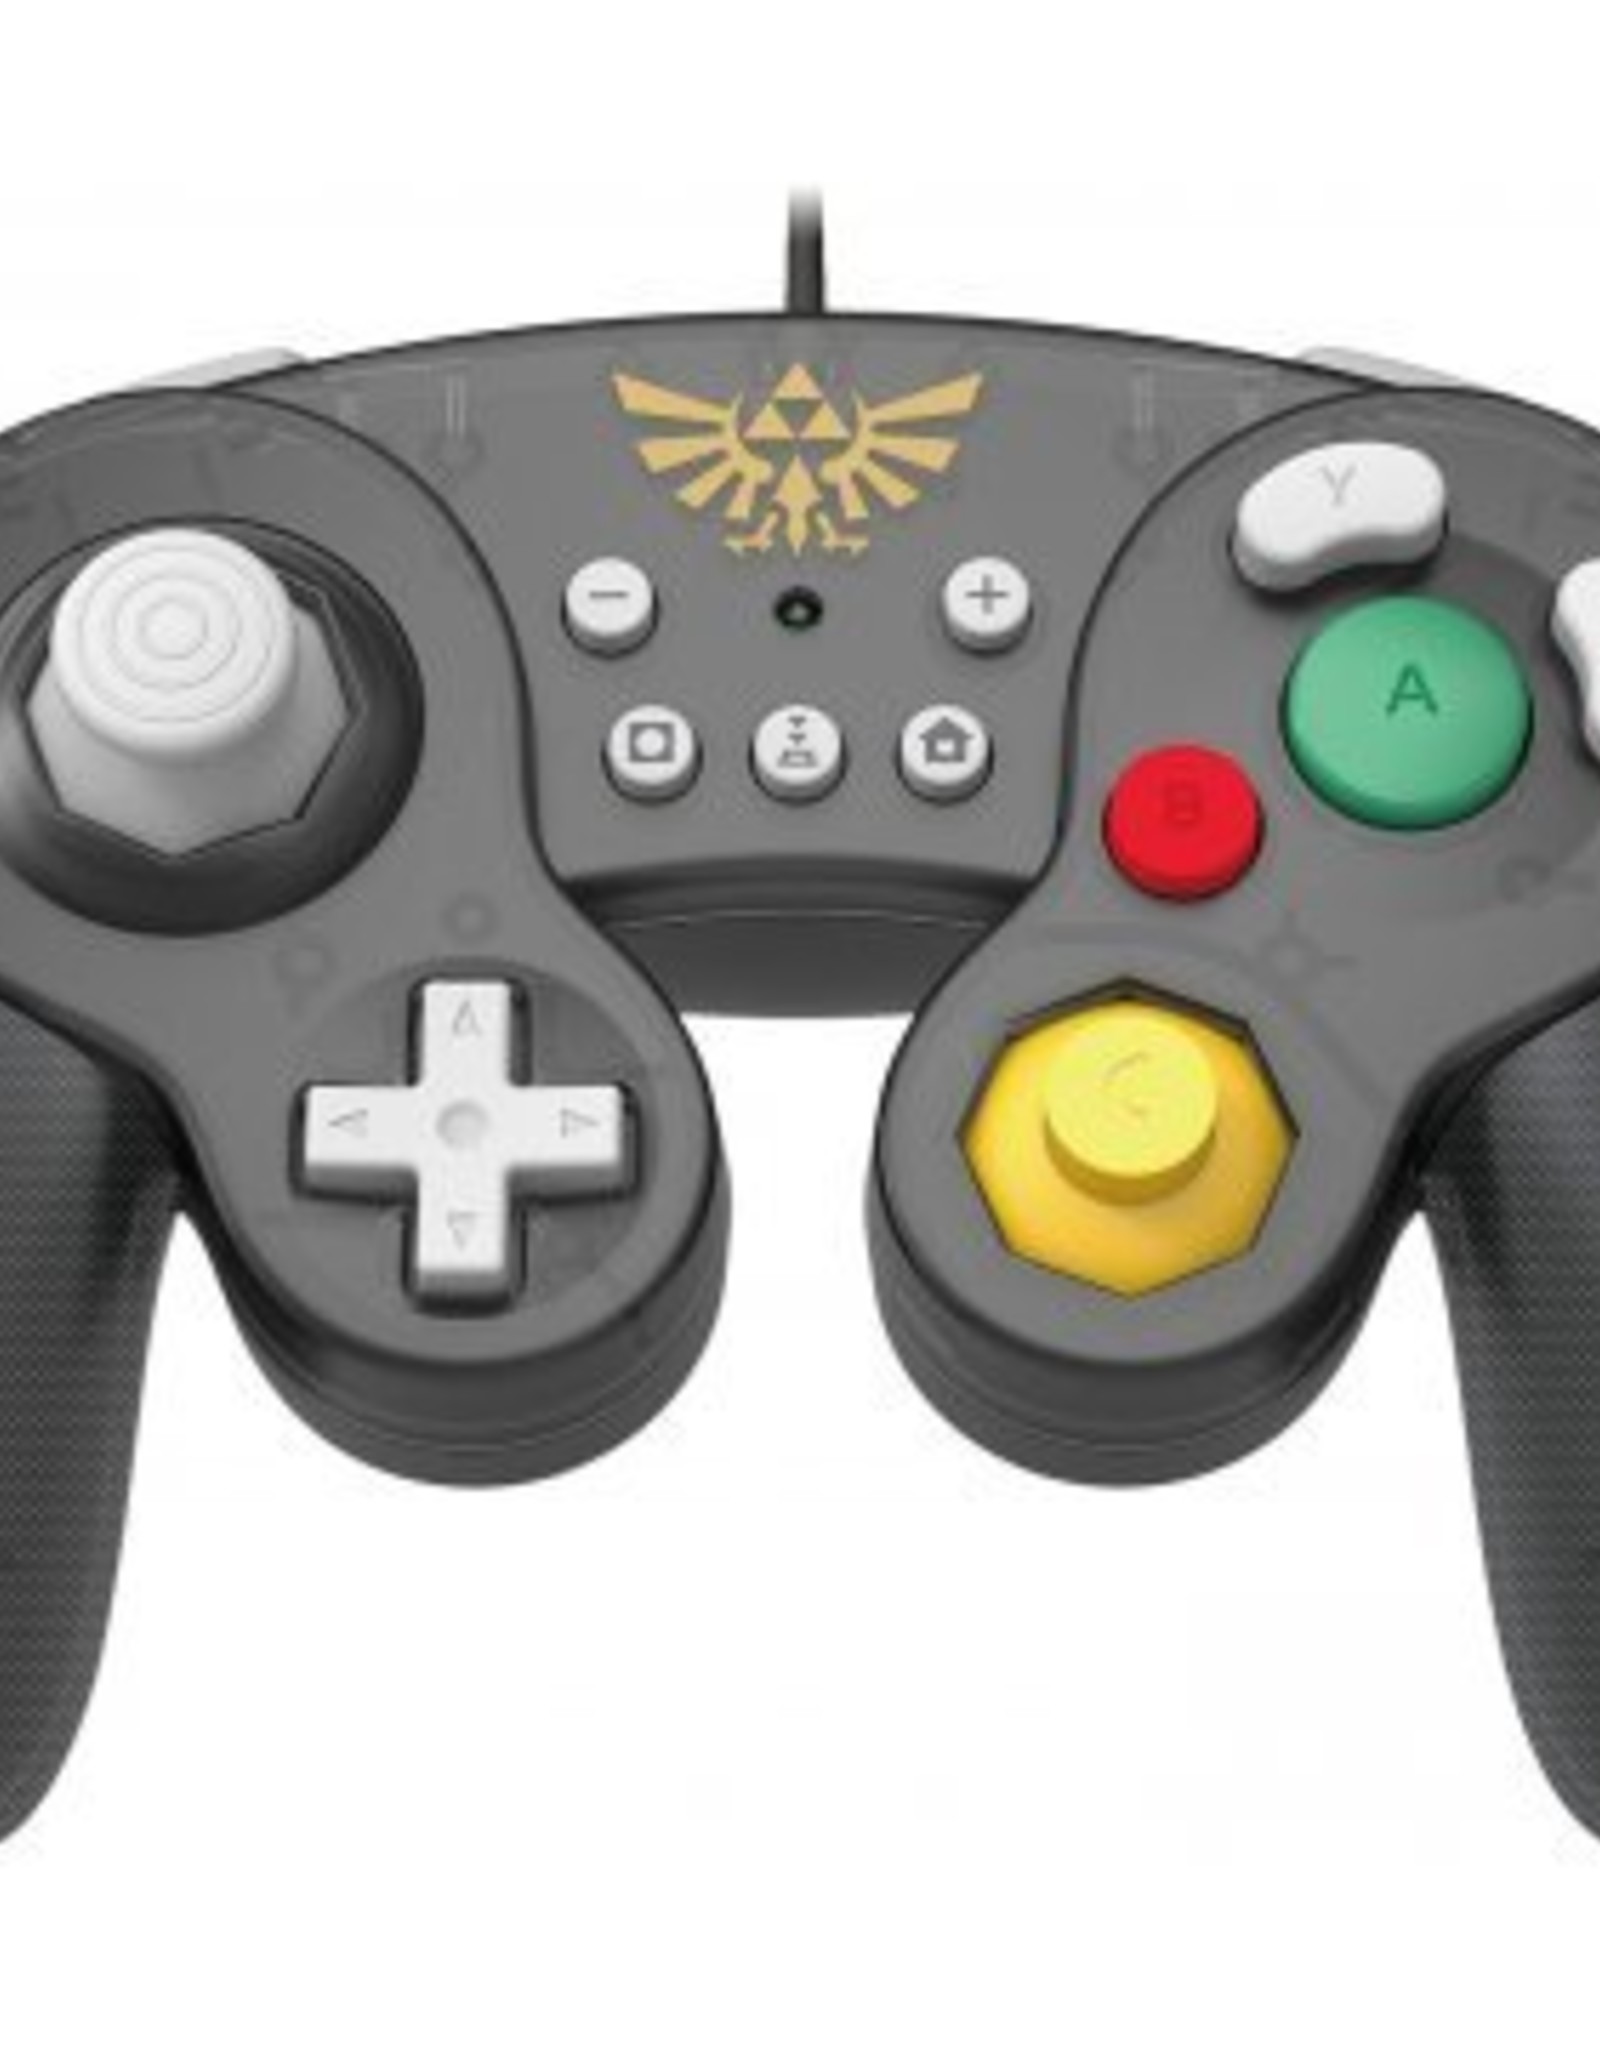 zelda switch wired controller